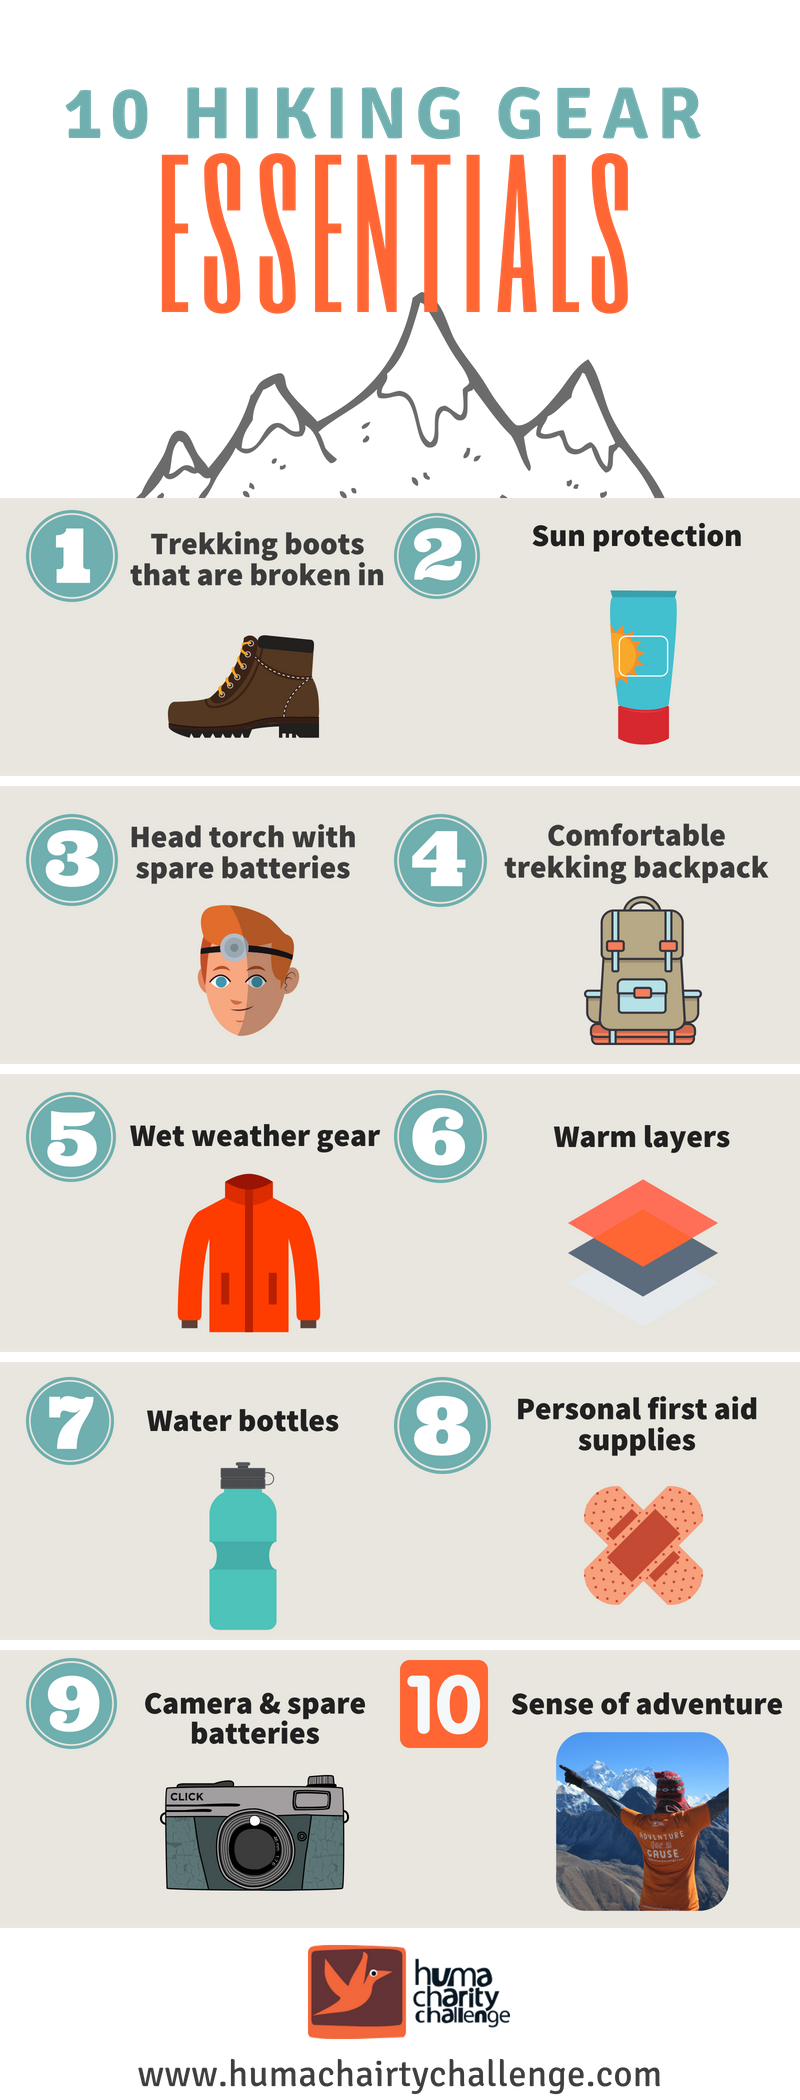 The Best Guide To The 10 Hiking Essentials: What To Pack For